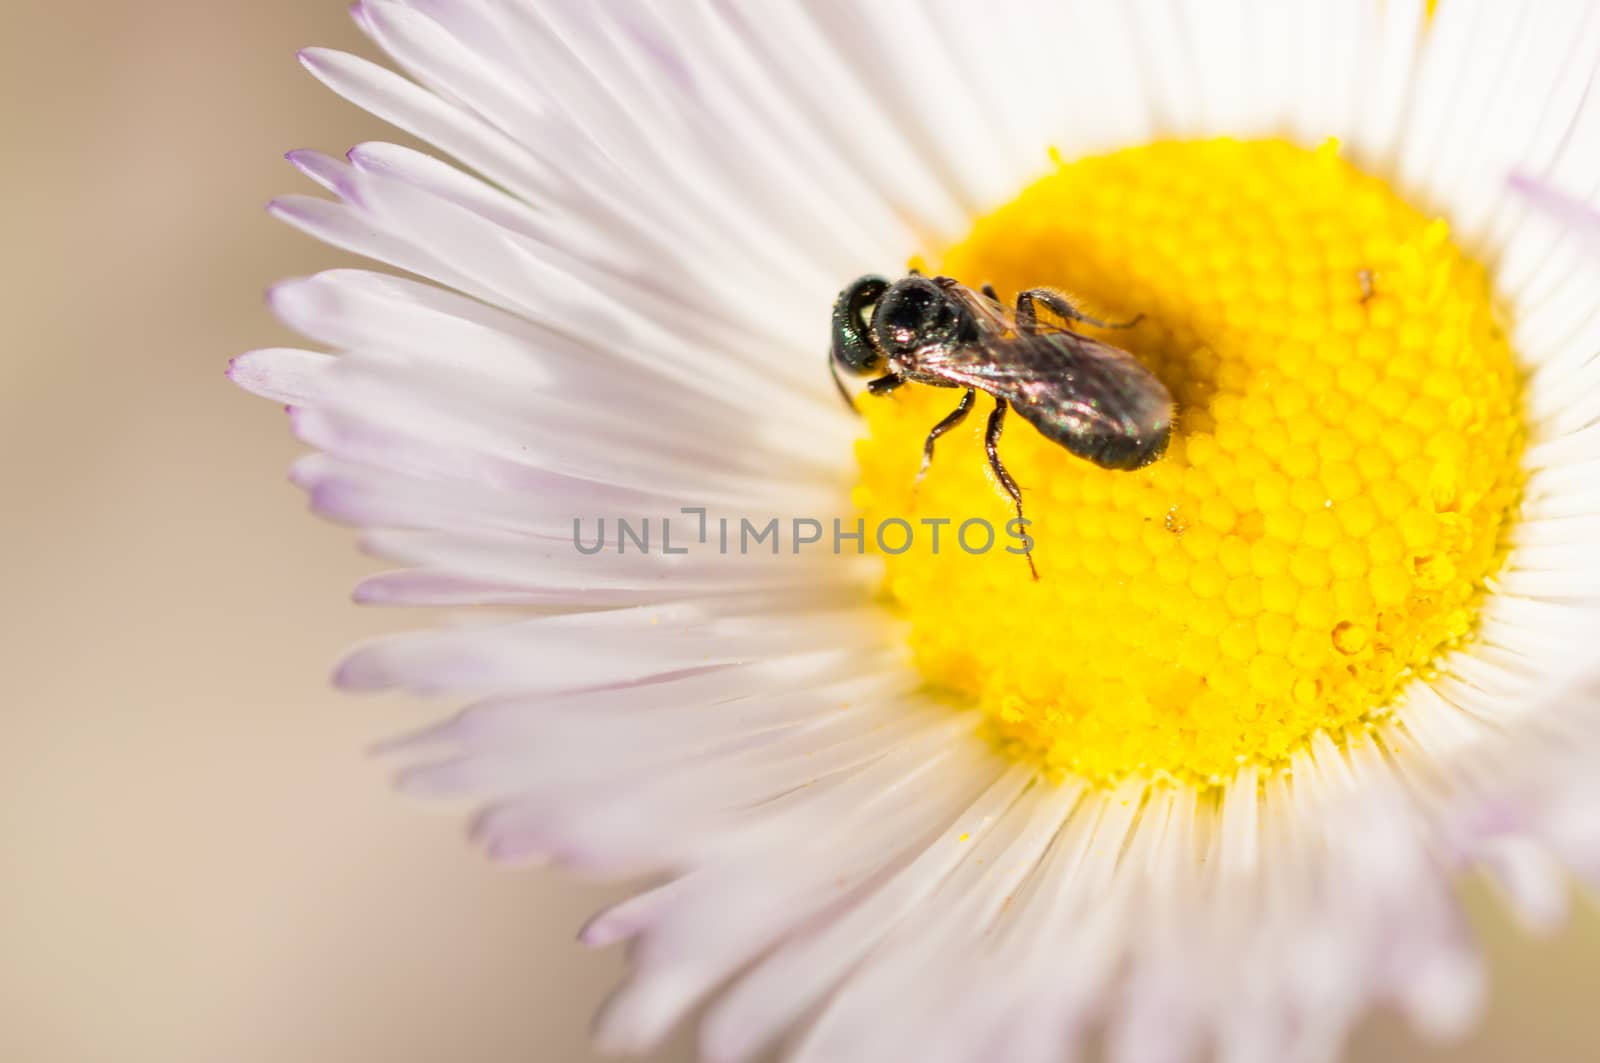 A small insect perched inside a white flower